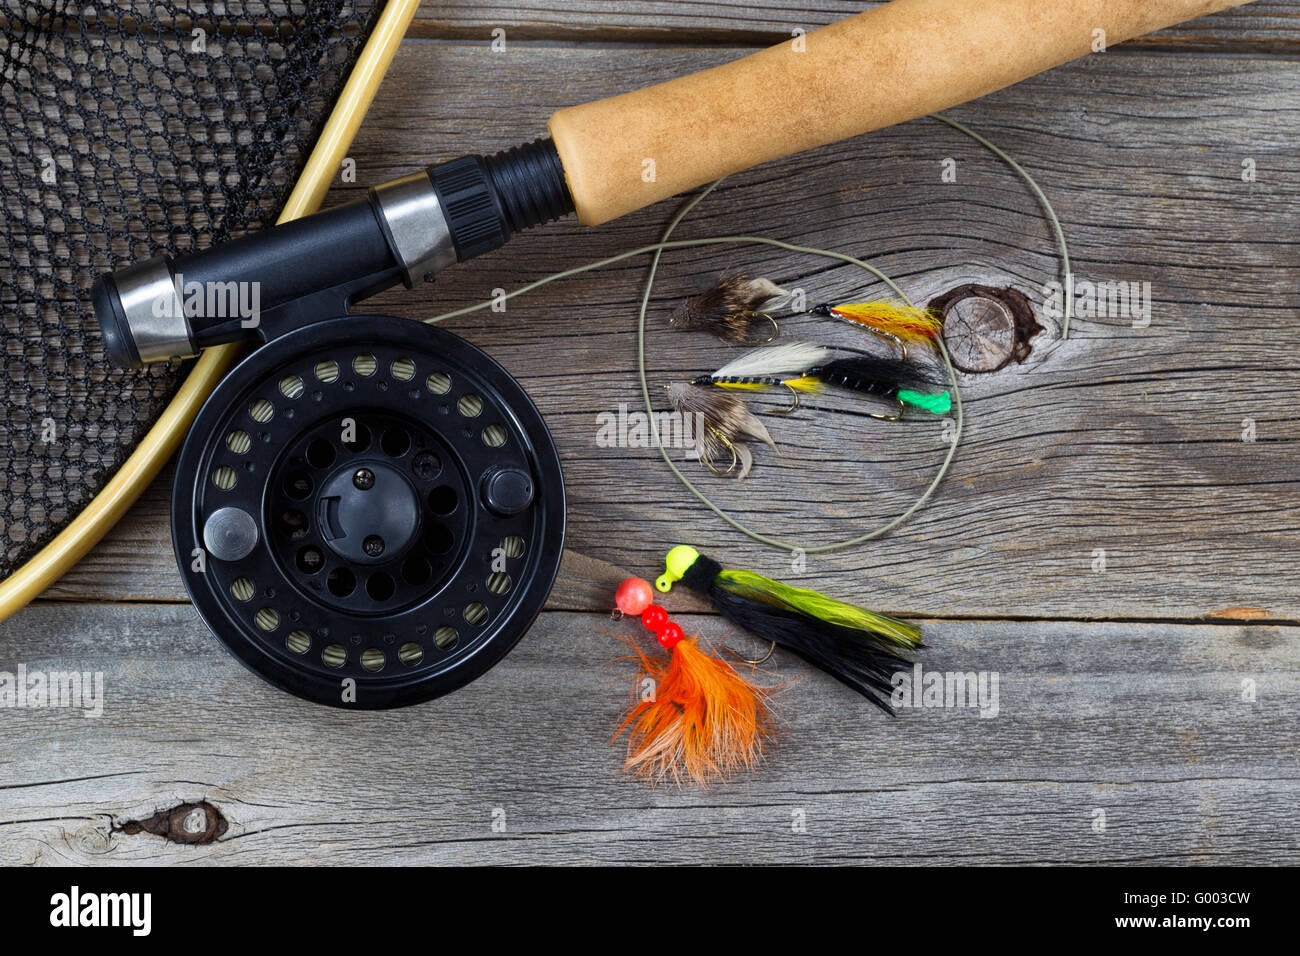 Fishing Fly reel with accessories on wood Stock Photo - Alamy